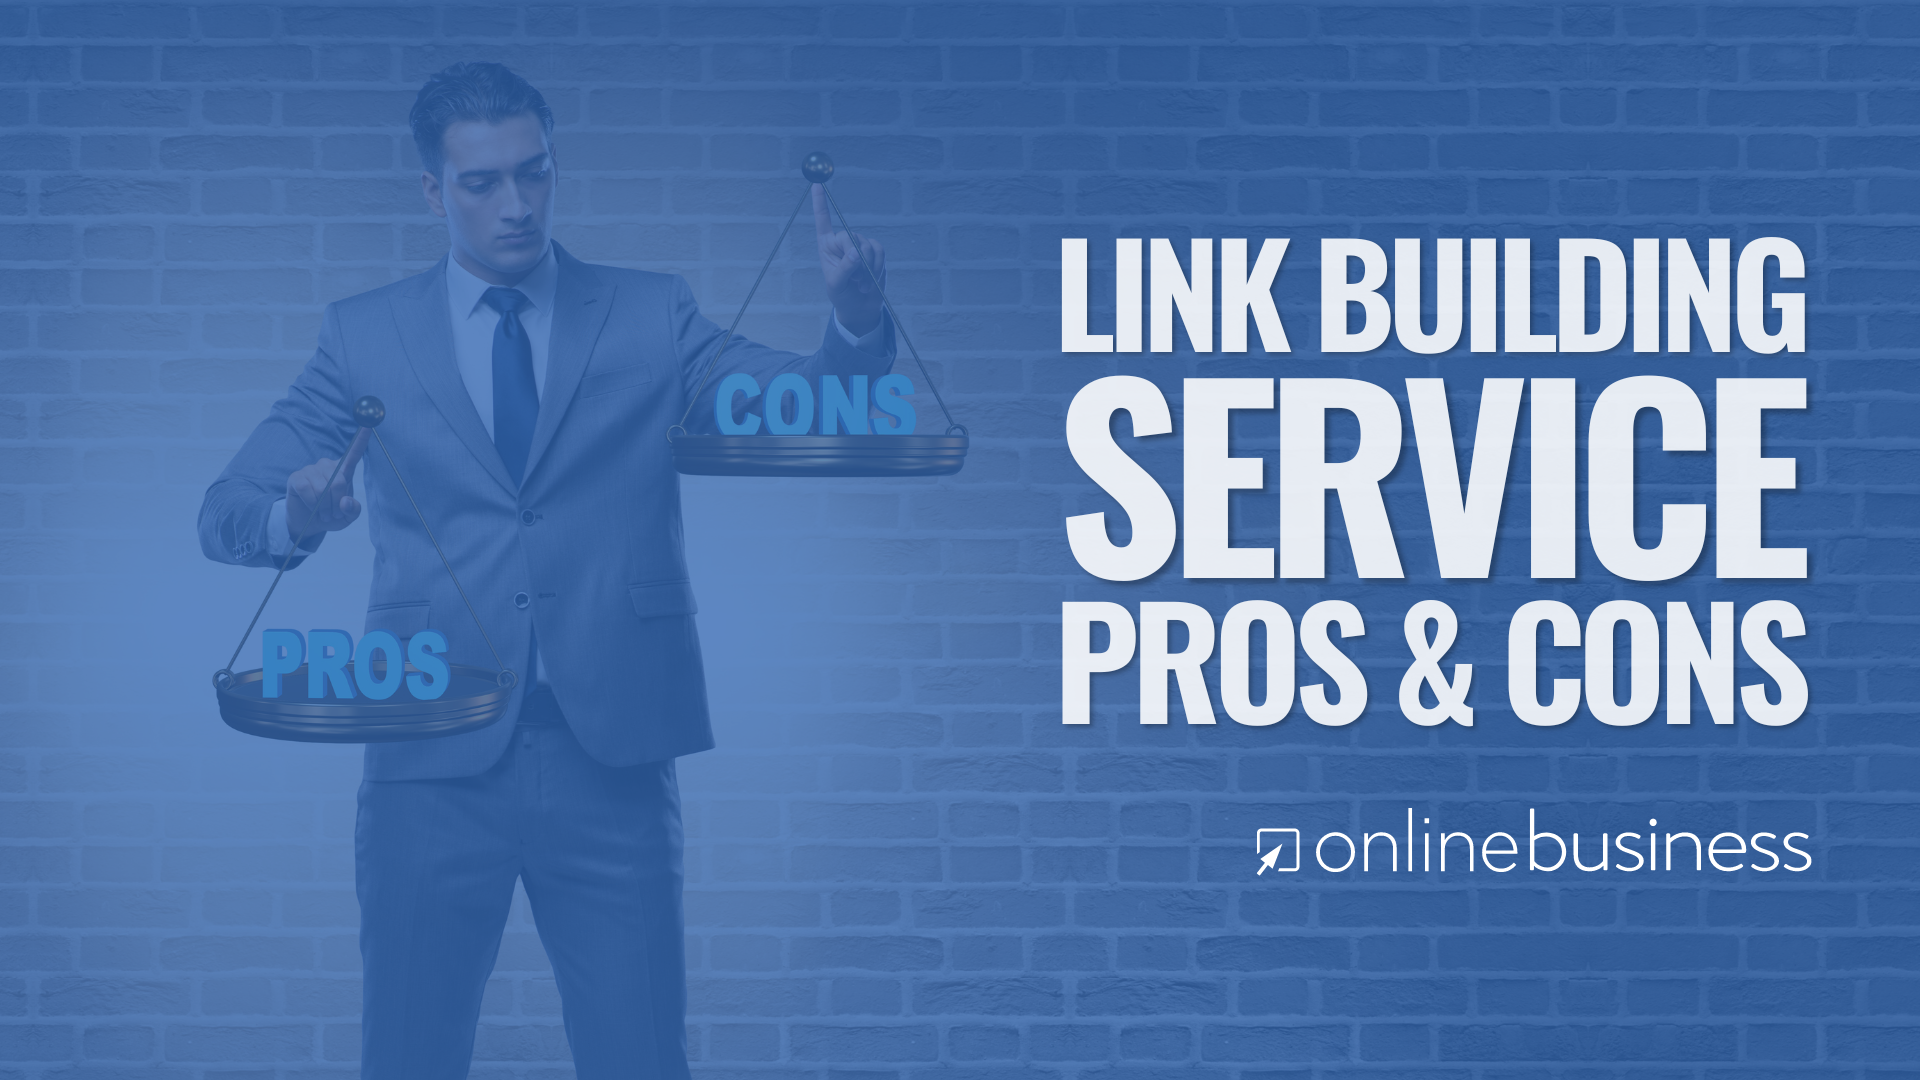 OnlineBusiness.com Discusses Pros and Cons of Using a Link Building Service